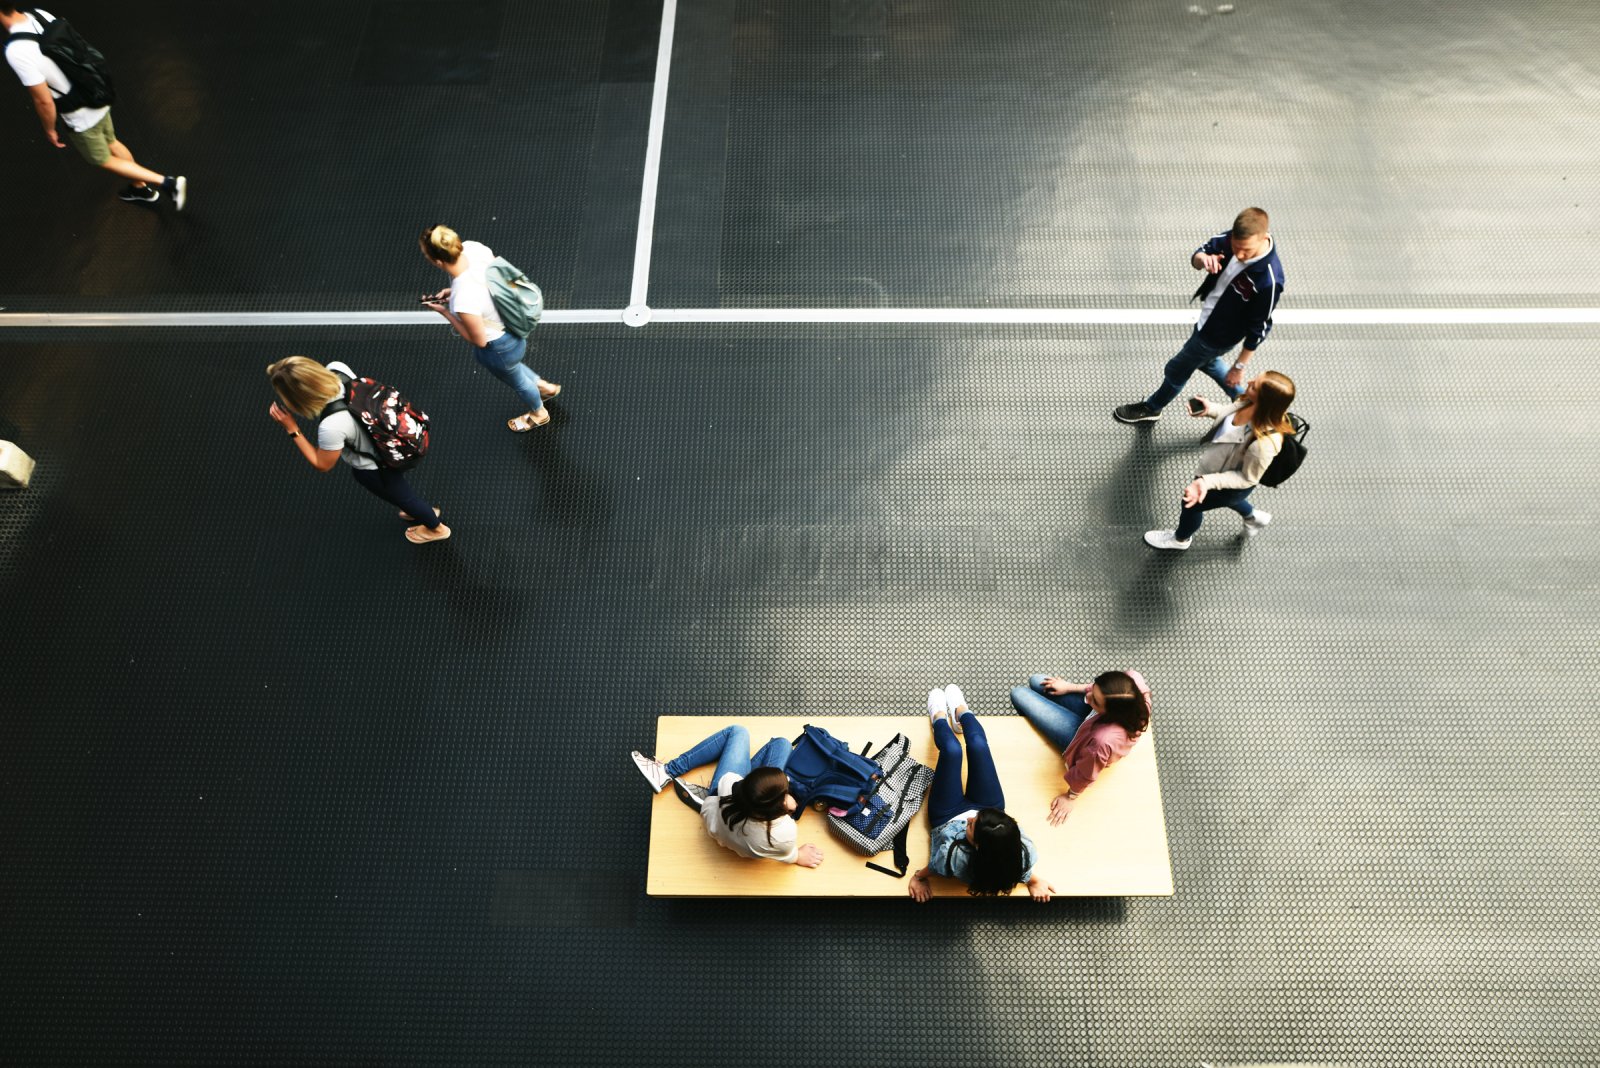 In the hall of Bielefeld University, photographed from above, students walking and sitting